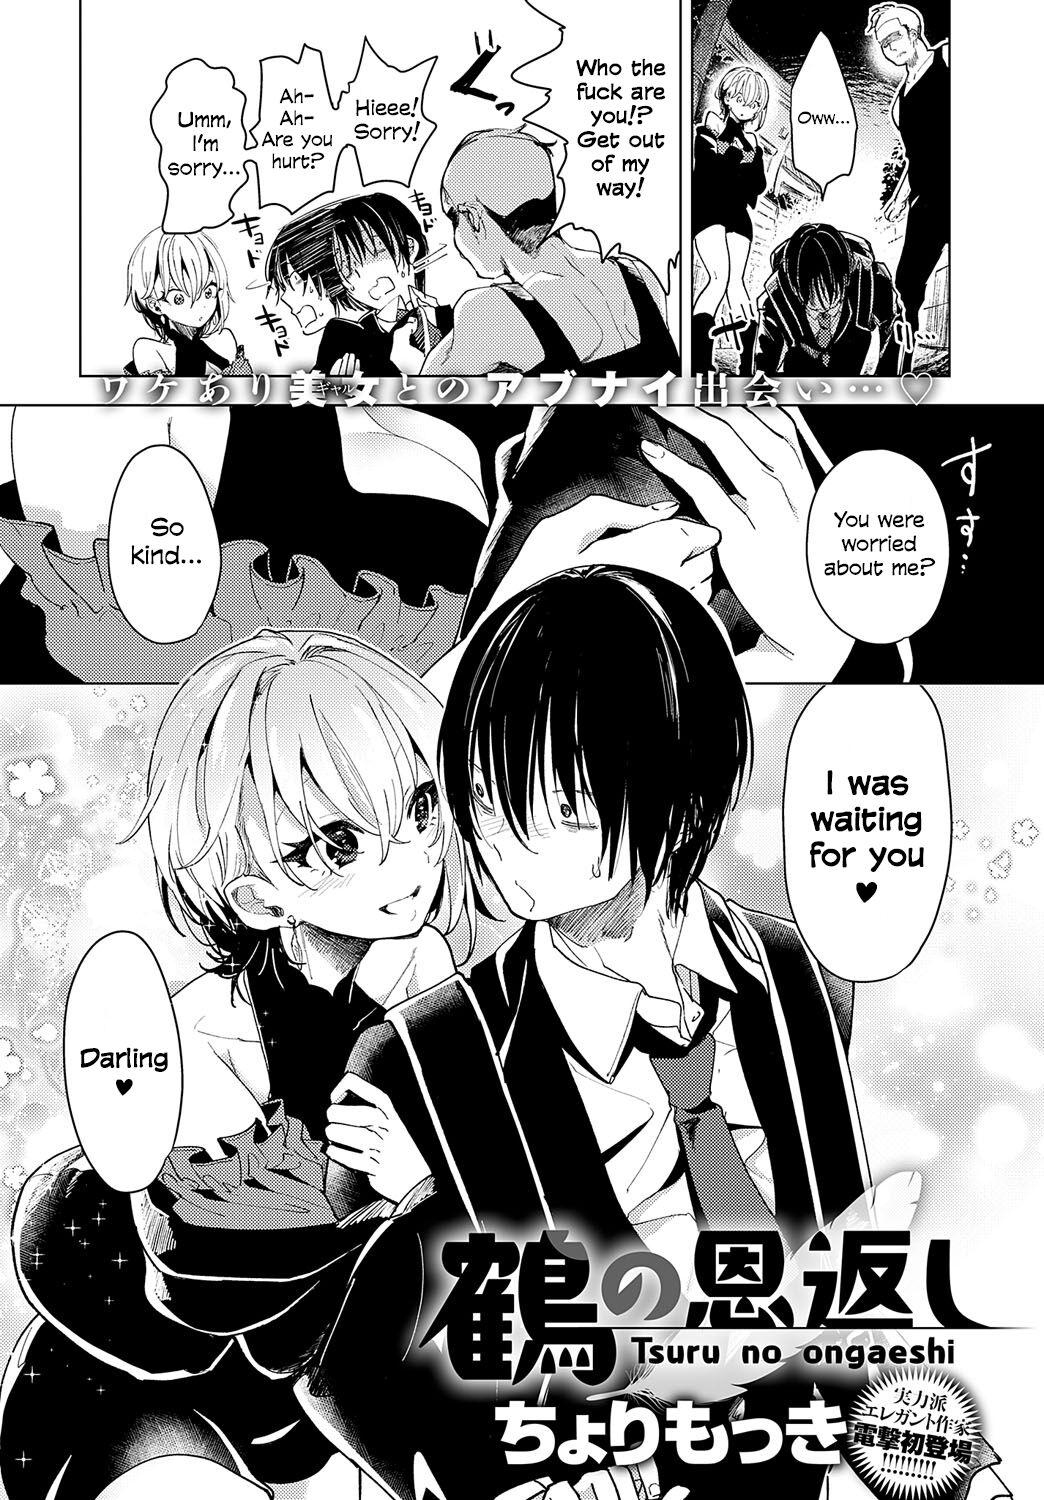 Beurette Tsuru No Ongaeshi | Crane's Return of a Favor Point Of View - Page 2